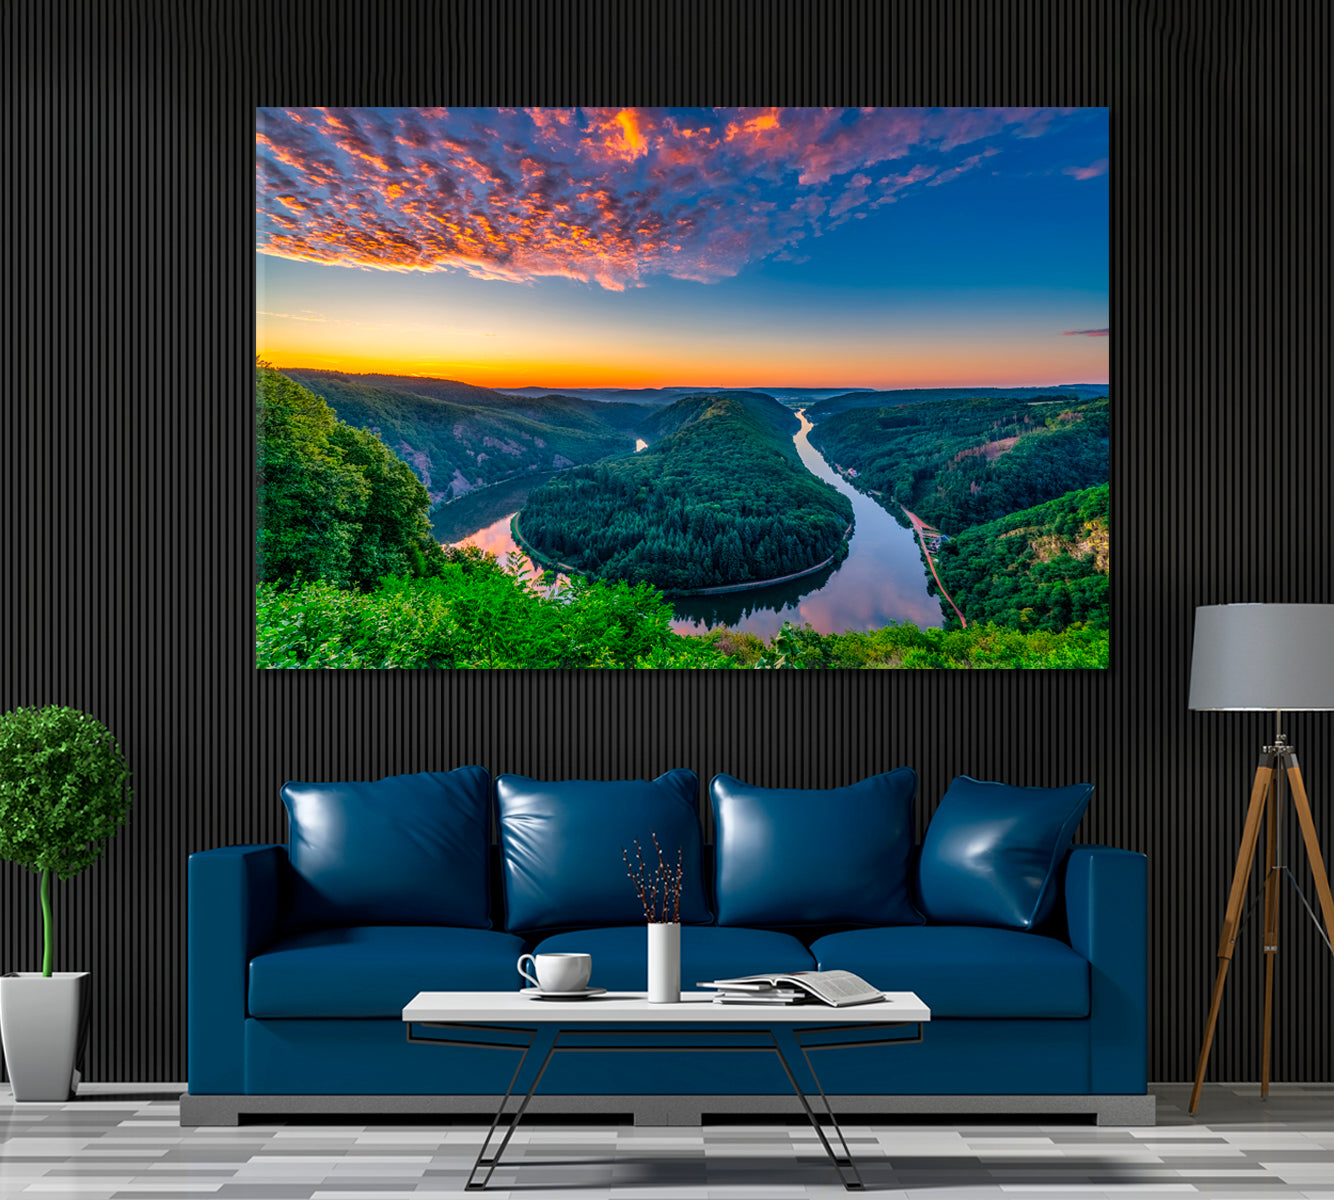 Saar River Valley South Germany Canvas Print ArtLexy 1 Panel 24"x16" inches 